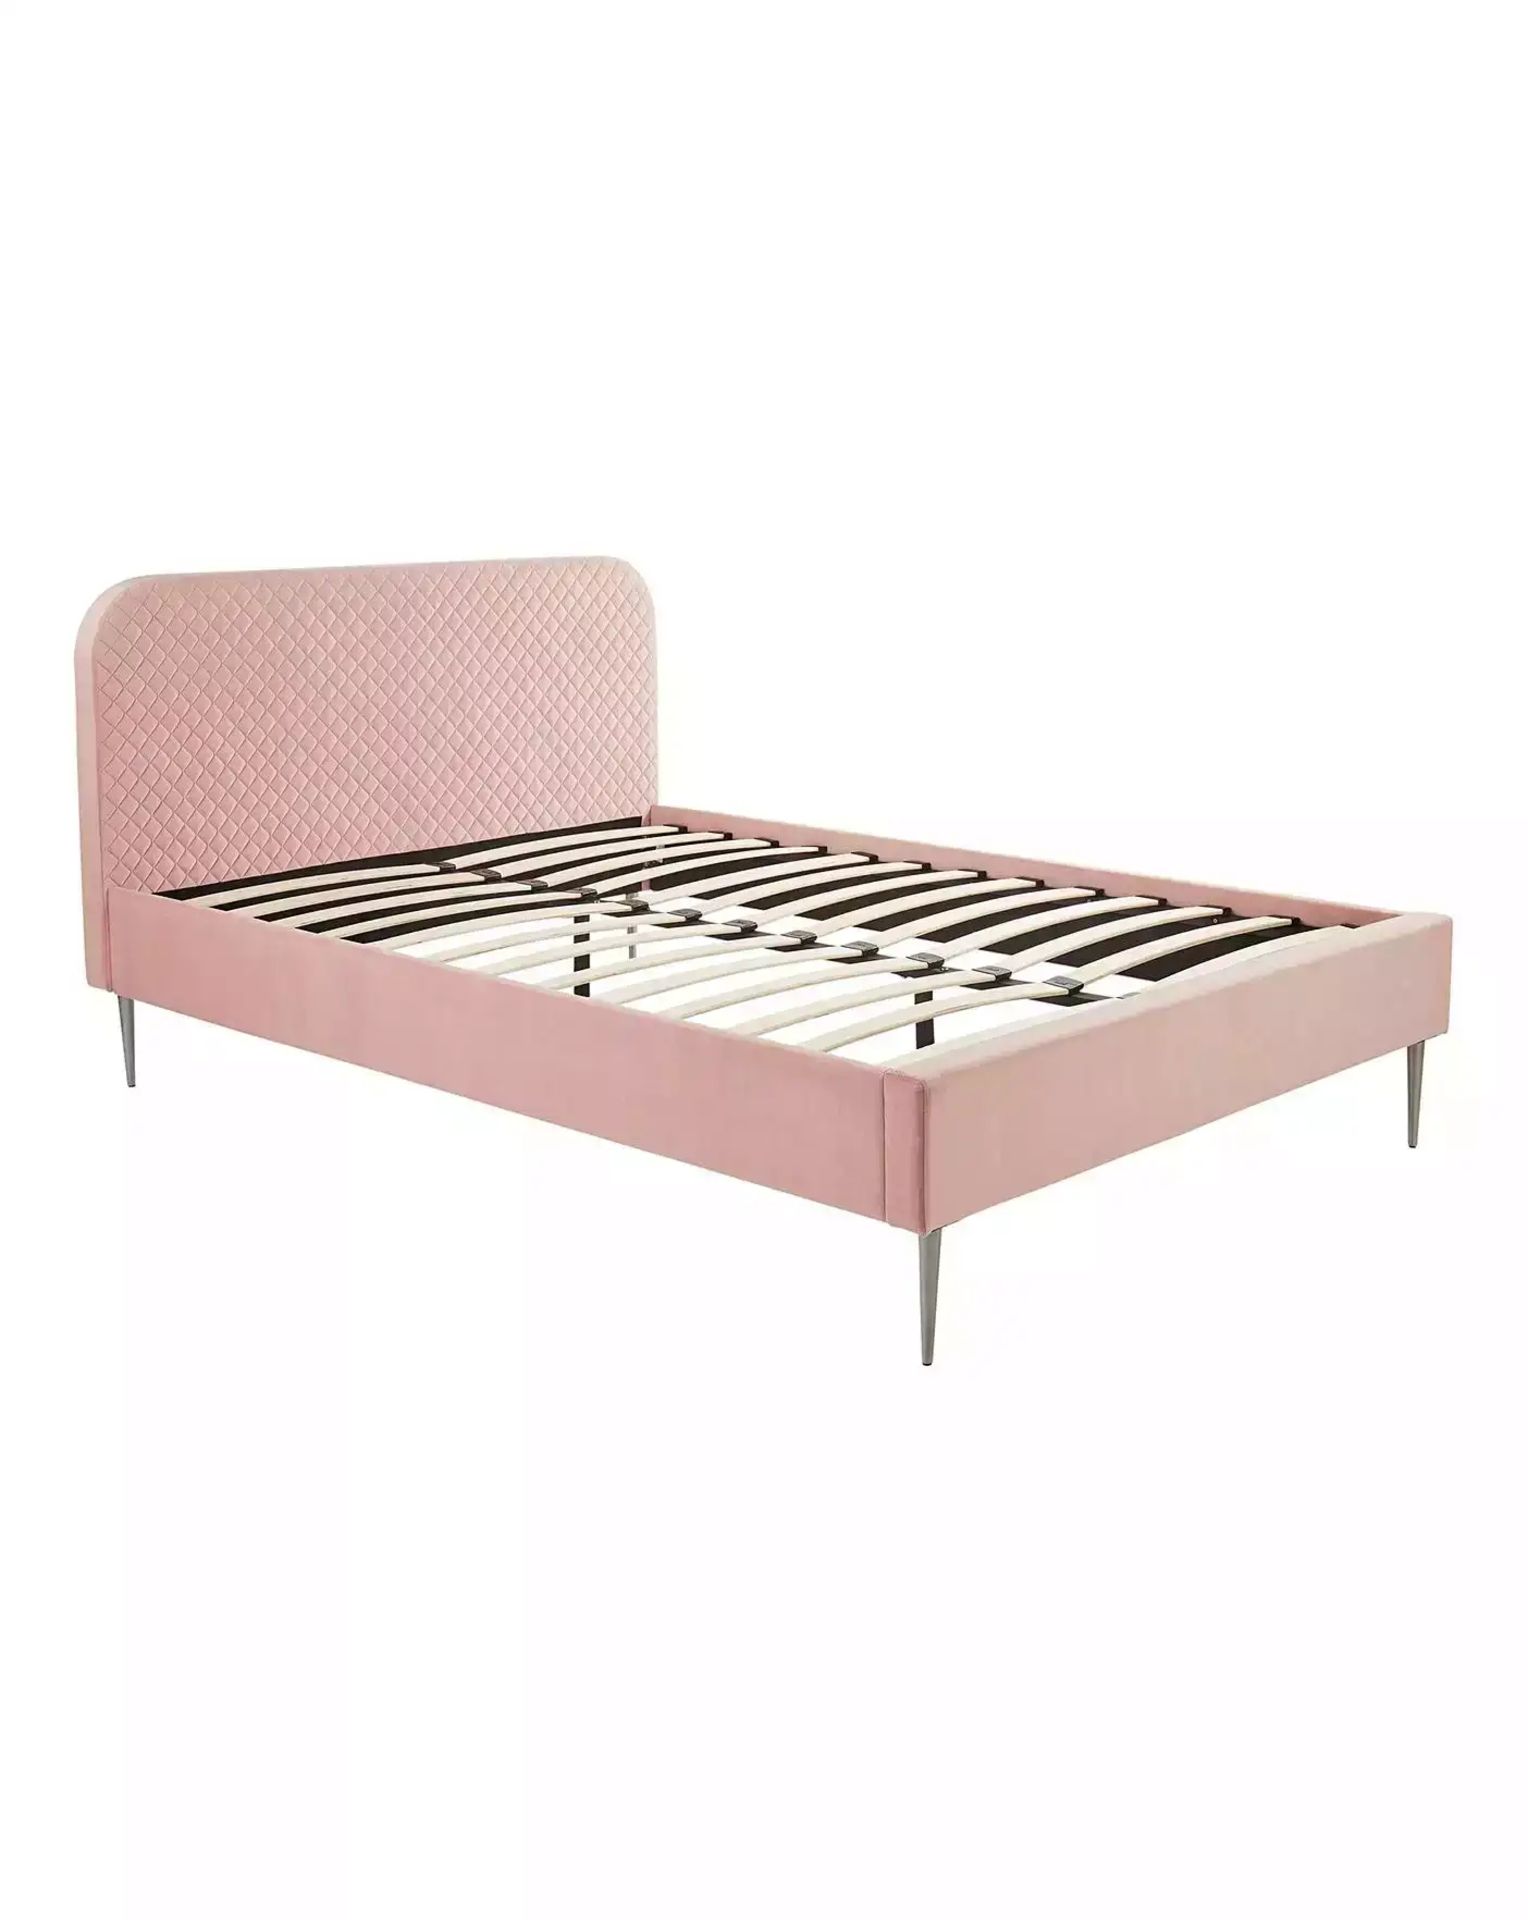 TRADE PALLET TO CONTAIN 4x BRAND NEW ARDEN Quilted DOUBLE Bed Frame. BLUSH. RRP £339 EACH. The Arden - Image 2 of 2